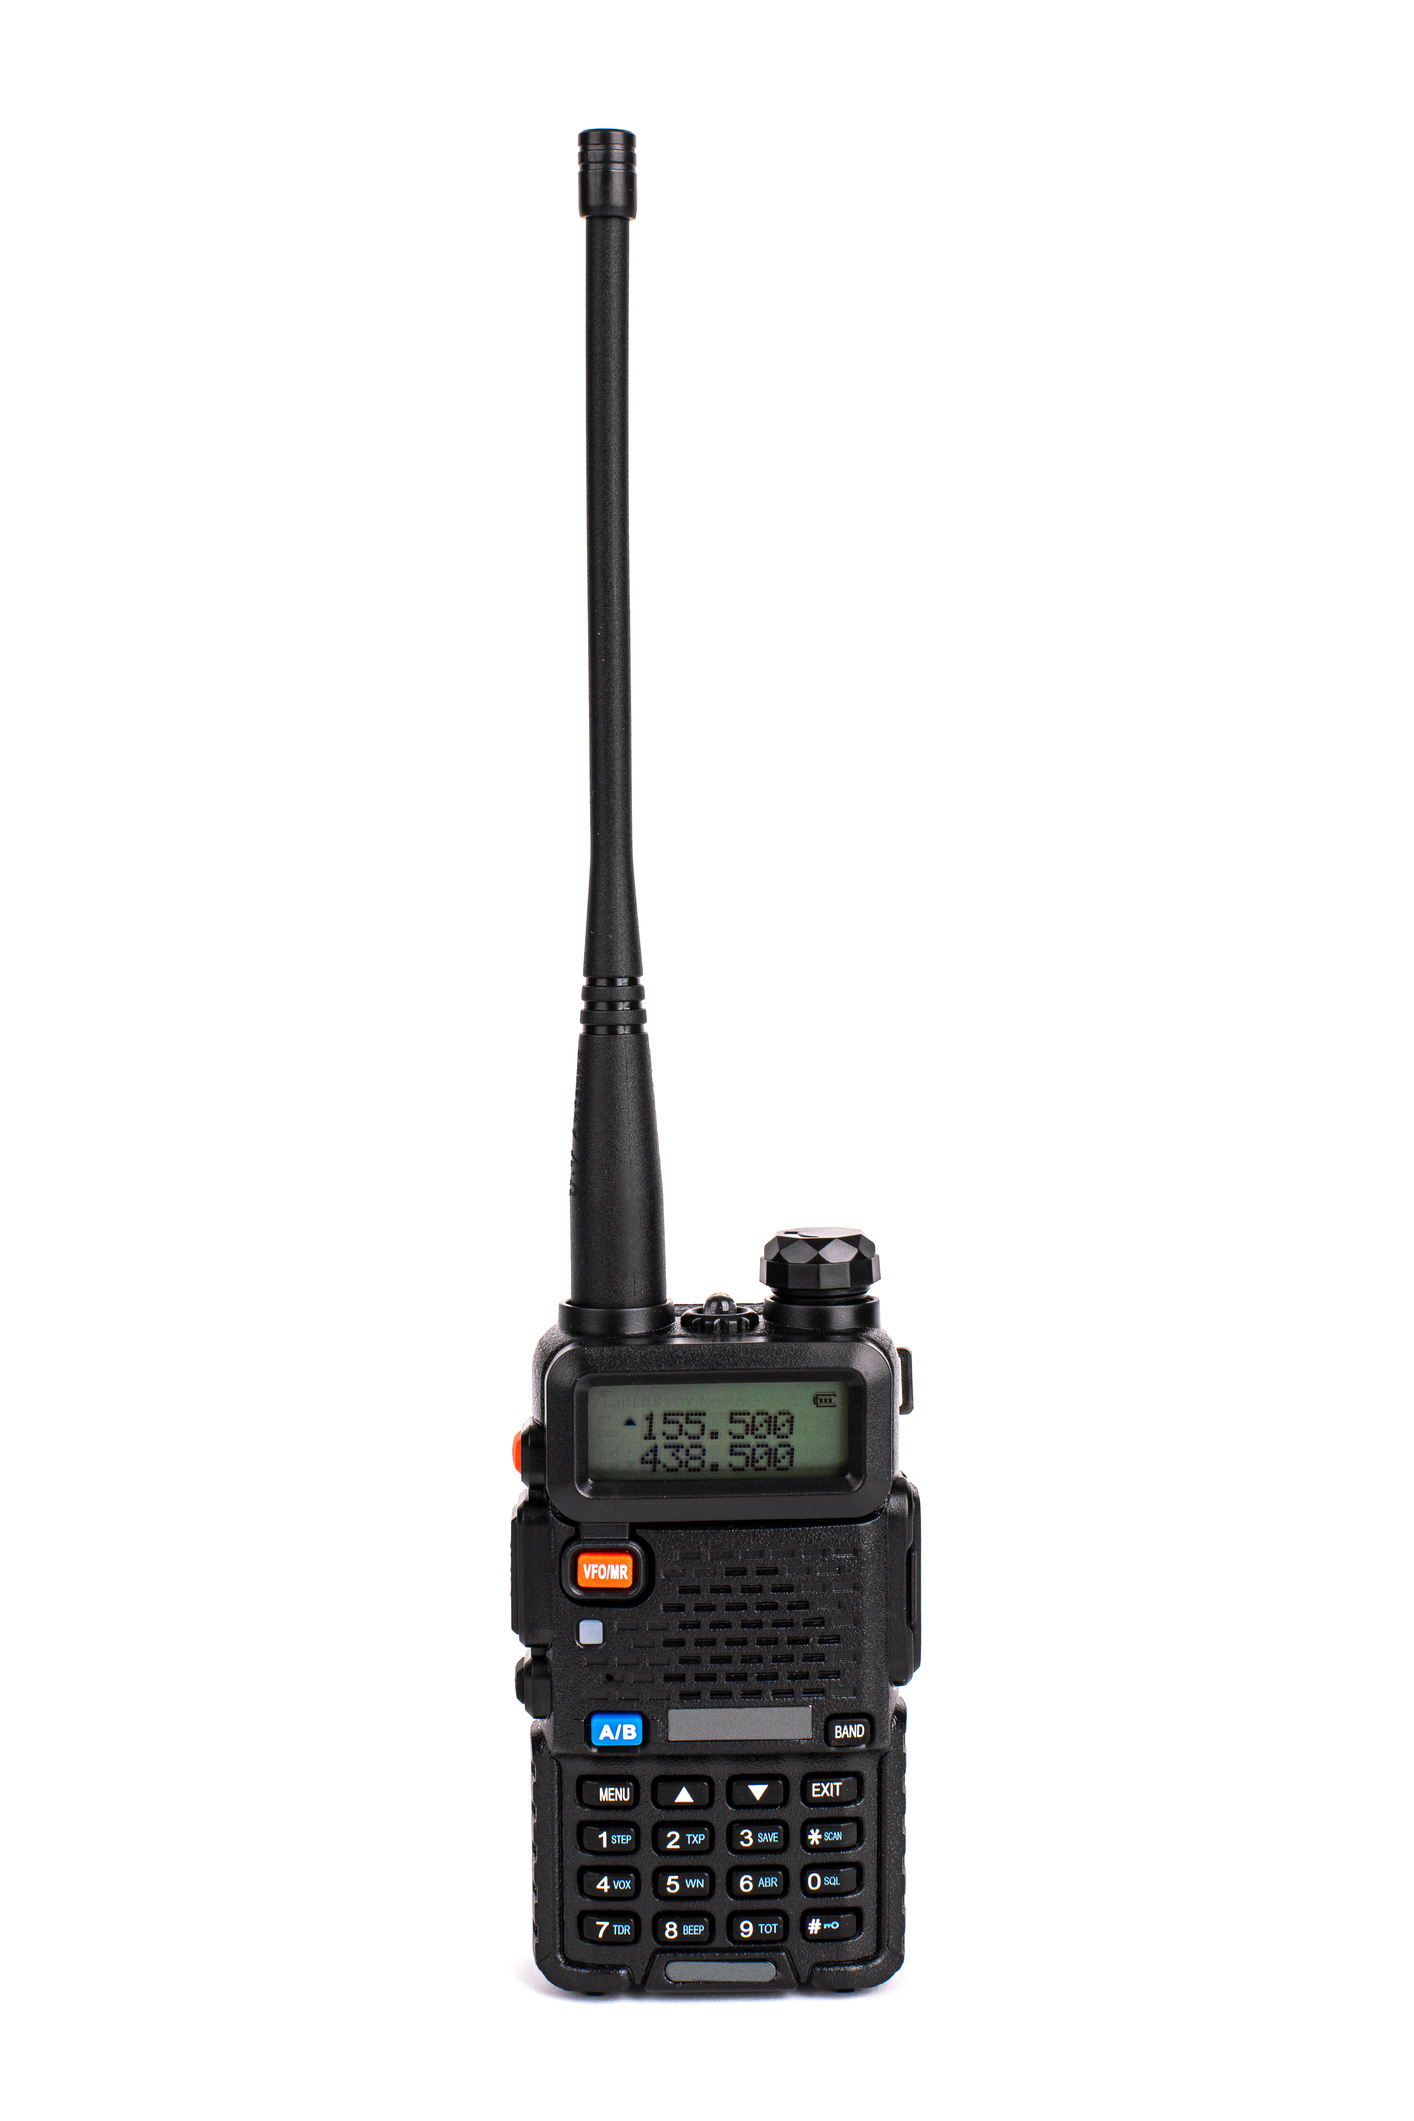 Handheld two-way radio with antenna and digital display on a plain background